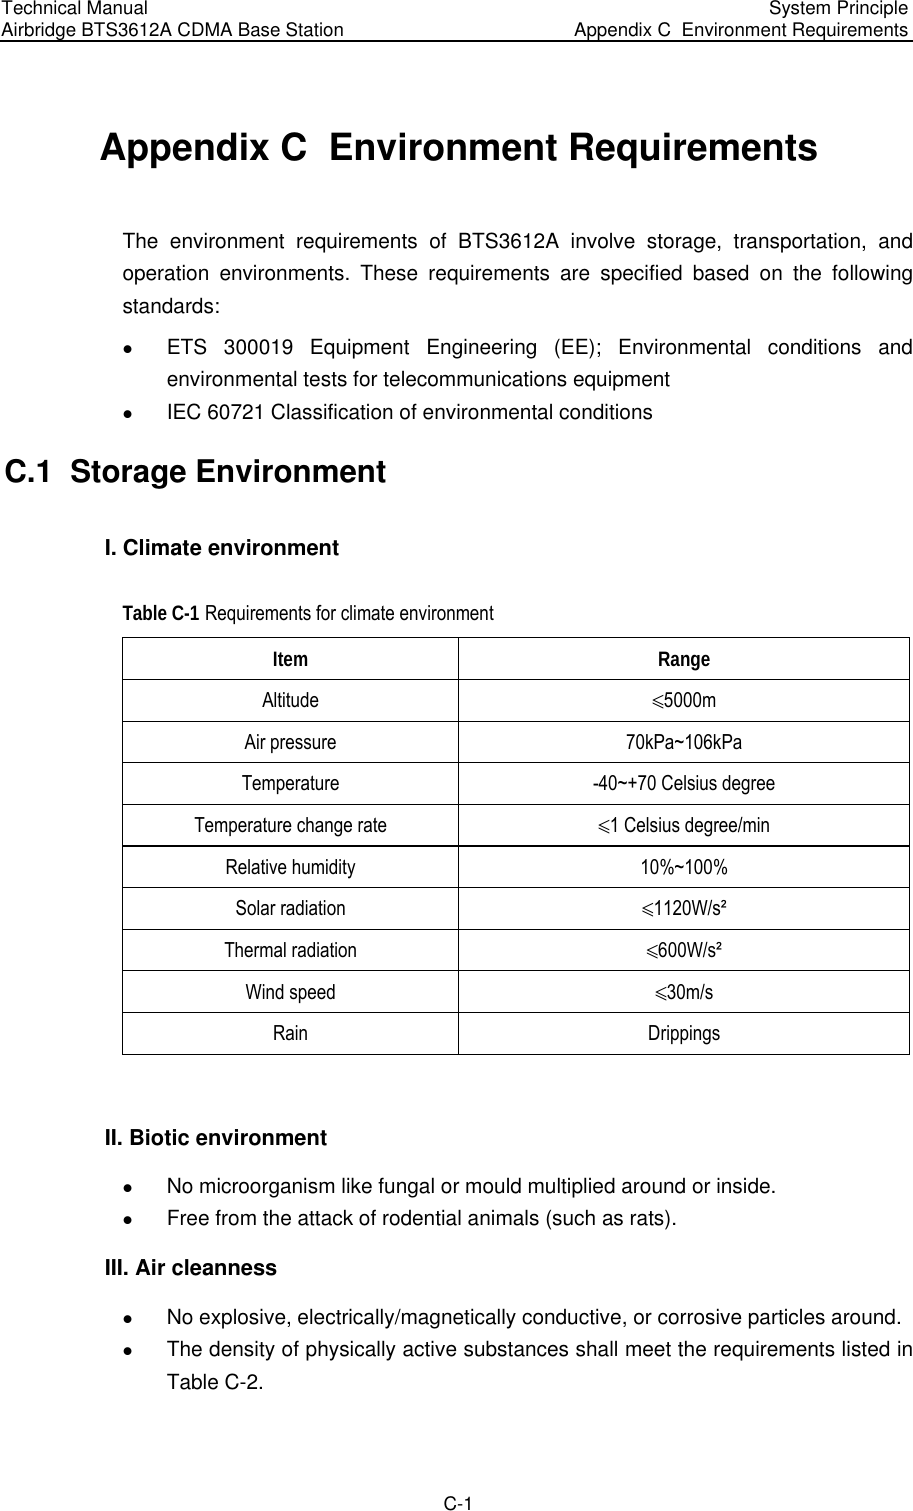 Technical Manual Airbridge BTS3612A CDMA Base Station  System Principle Appendix C  Environment Requirements  C-1 Appendix C  Environment Requirements The environment requirements of BTS3612A involve storage, transportation, and operation environments. These requirements are specified based on the following standards:  z ETS 300019 Equipment Engineering (EE); Environmental conditions and environmental tests for telecommunications equipment z IEC 60721 Classification of environmental conditions C.1  Storage Environment I. Climate environment Table C-1 Requirements for climate environment Item Range Altitude  ñ5000m Air pressure  70kPa~106kPa Temperature  -40~+70 Celsius degree Temperature change rate  ñ1 Celsius degree/min Relative humidity  10%~100% Solar radiation  ñ1120W/s² Thermal radiation  ñ600W/s² Wind speed  ñ30m/s Rain Drippings  II. Biotic environment z No microorganism like fungal or mould multiplied around or inside.  z Free from the attack of rodential animals (such as rats).  III. Air cleanness z No explosive, electrically/magnetically conductive, or corrosive particles around.  z The density of physically active substances shall meet the requirements listed in Table C-2.  